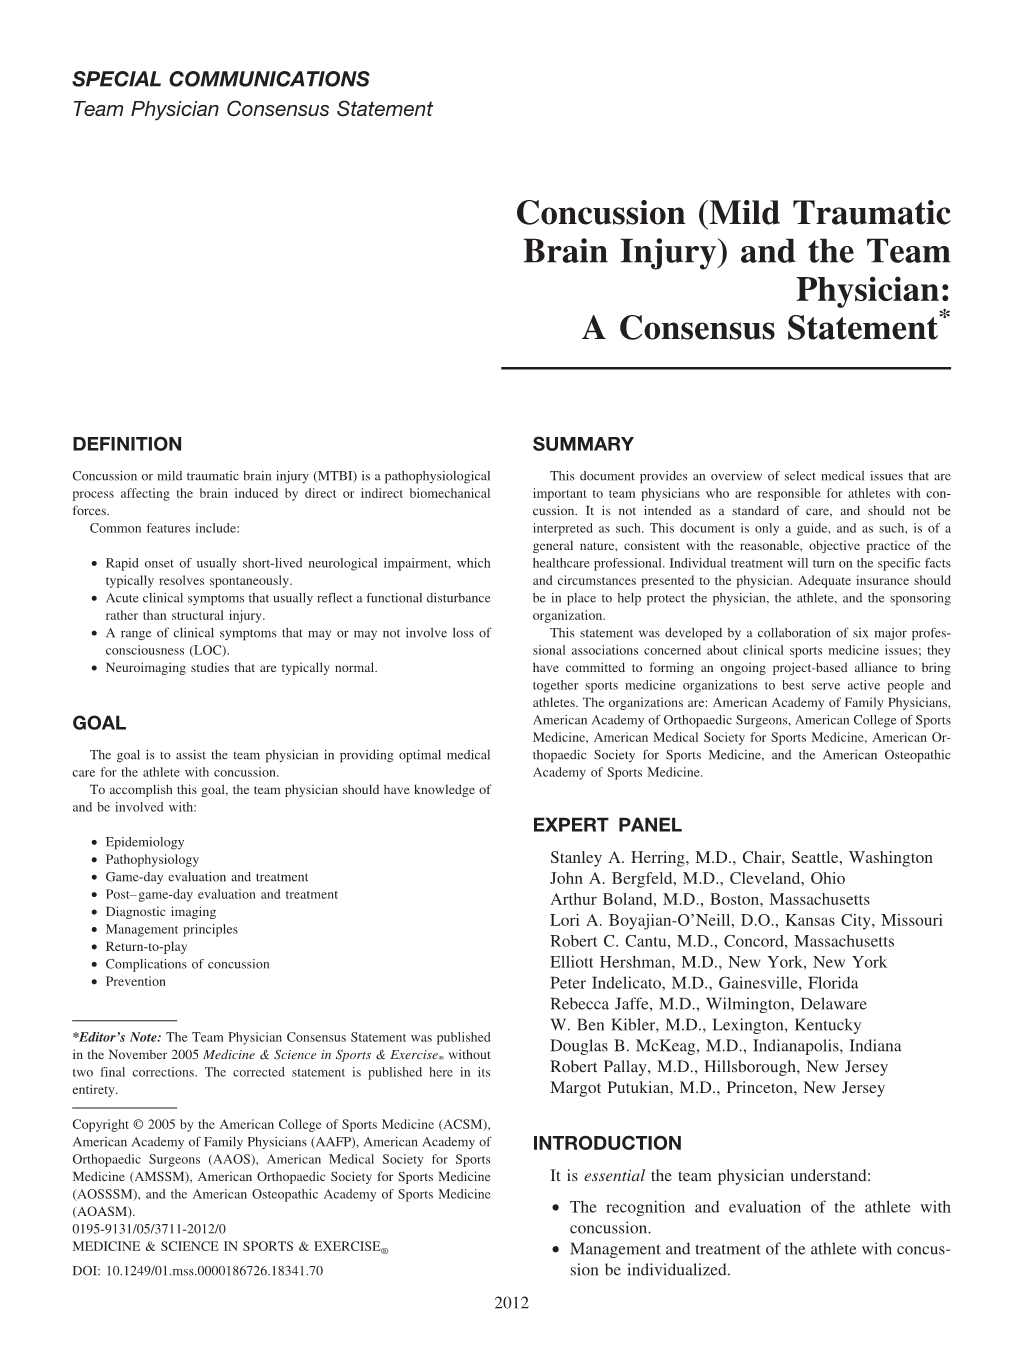 Concussion (Mild Traumatic Brain Injury) and the Team Physician: a Consensus Statement*